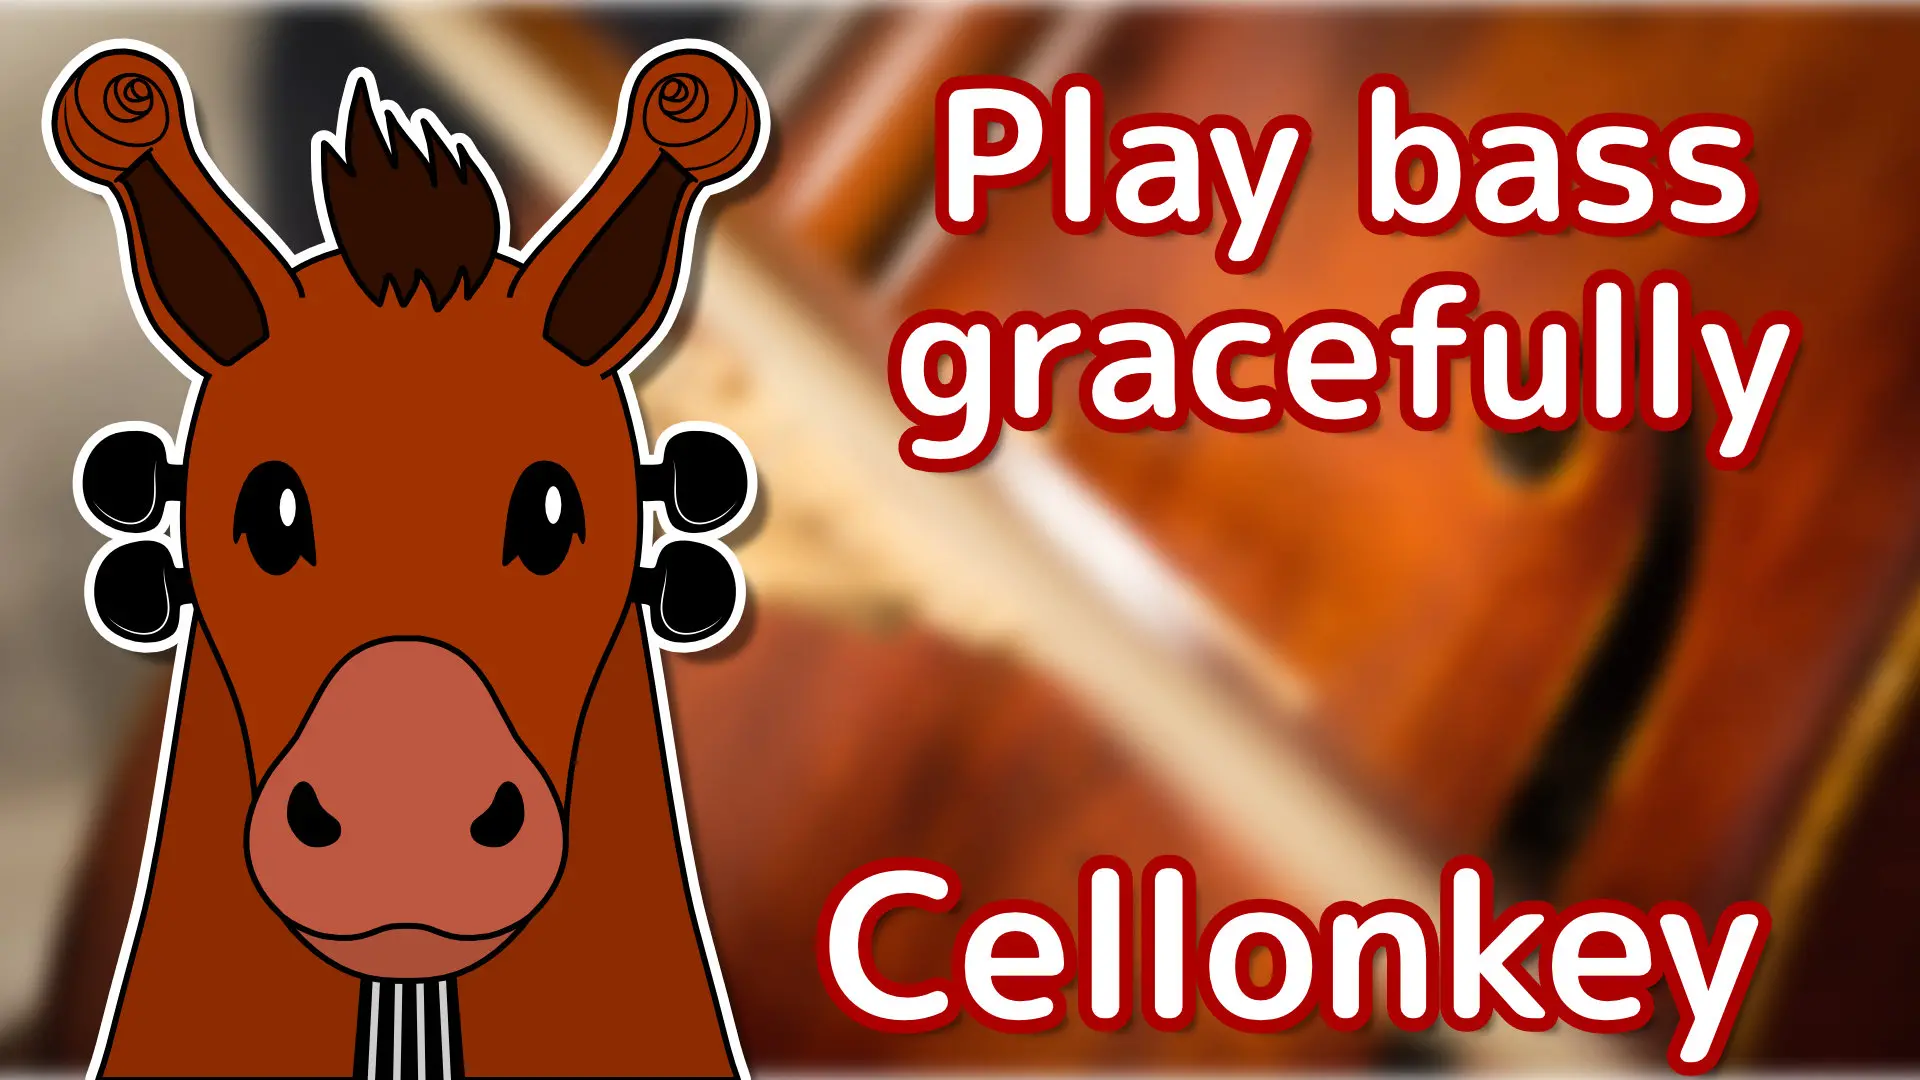 Cover Image for Cellonkey